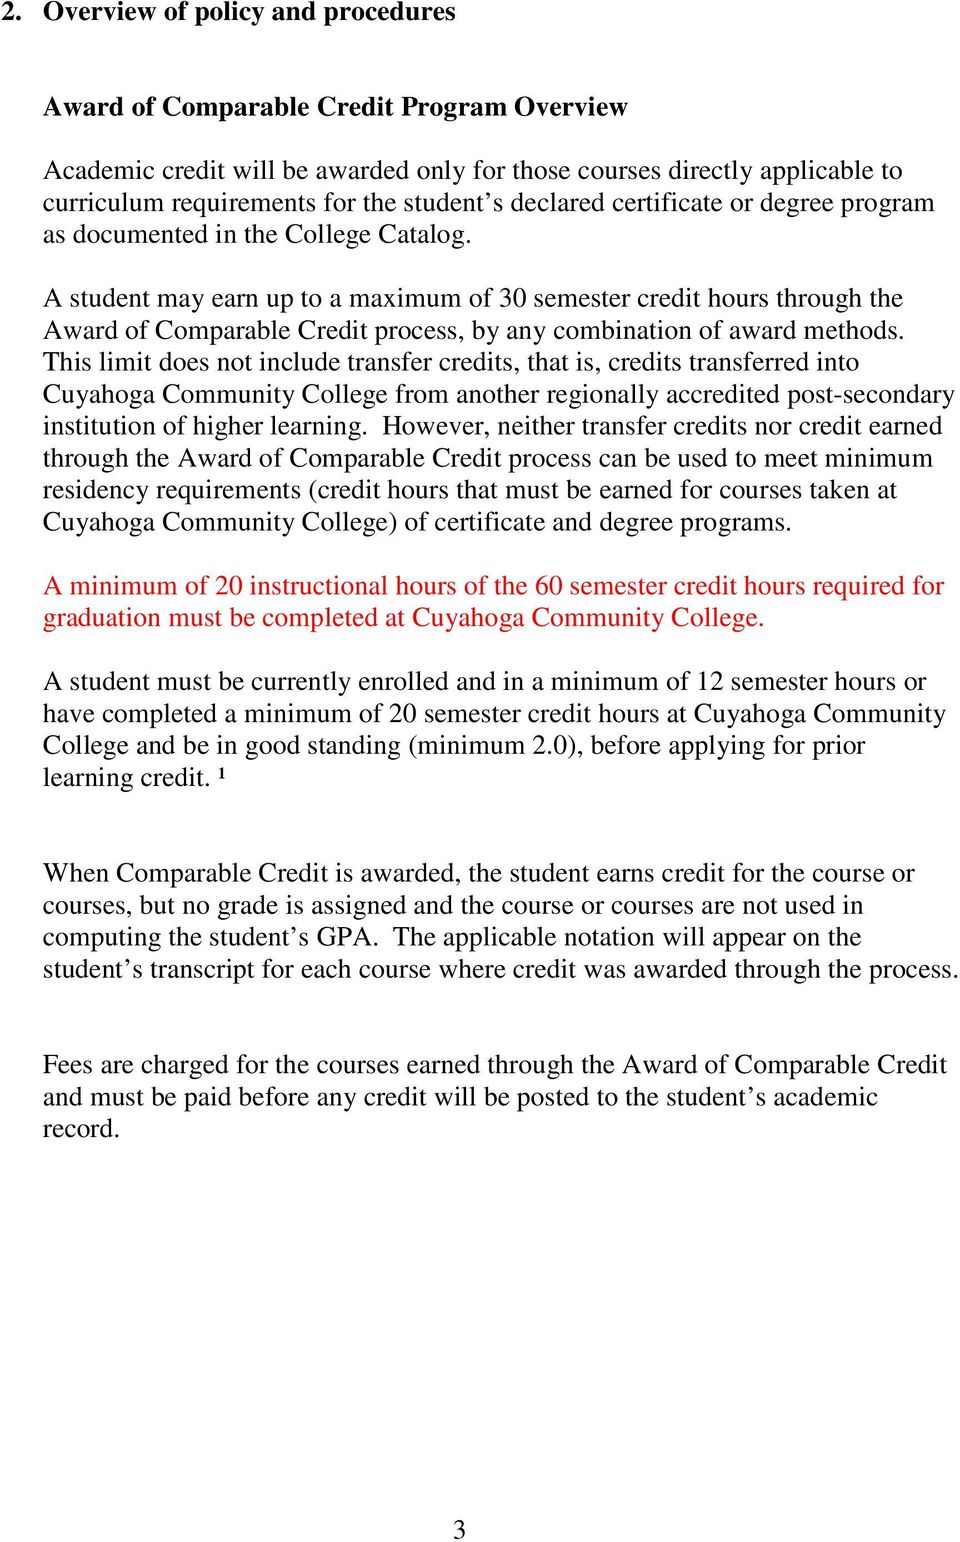 A student may earn up to a maximum of 30 semester credit hours through the Award of Comparable Credit process, by any combination of award methods.